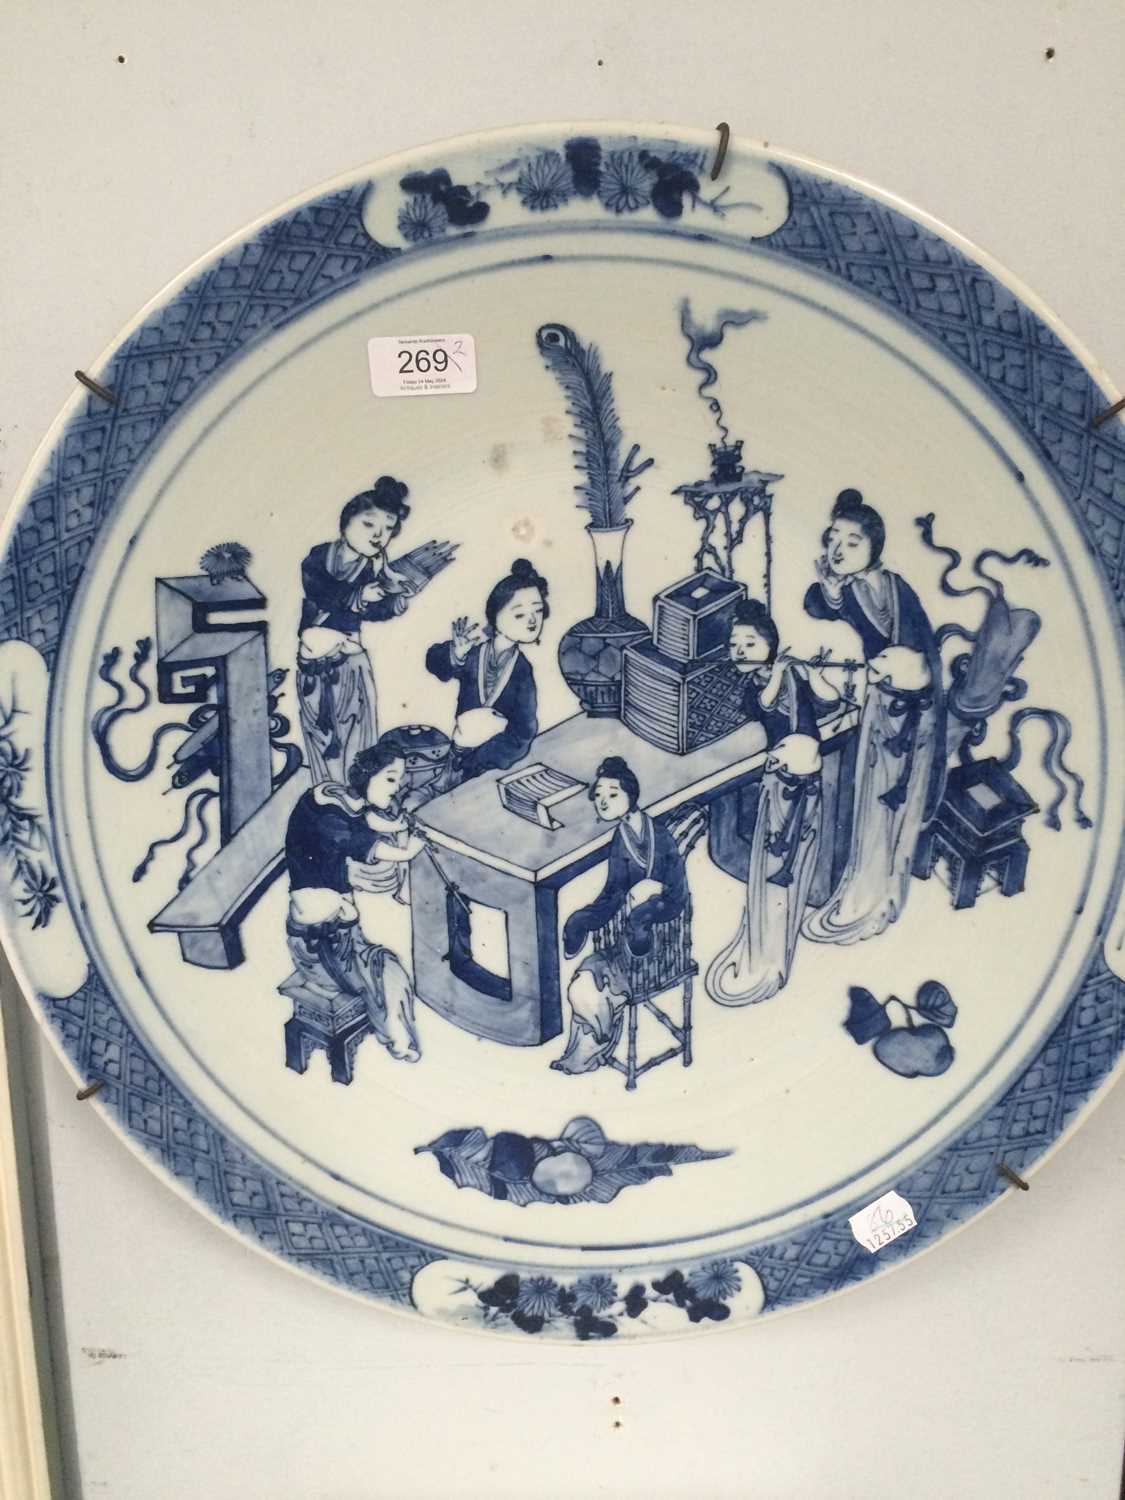 A Pair of Chinese Porcelain "Ladies" Chargers, Qing dynasty, painted in underglaze blue with figures - Image 7 of 7